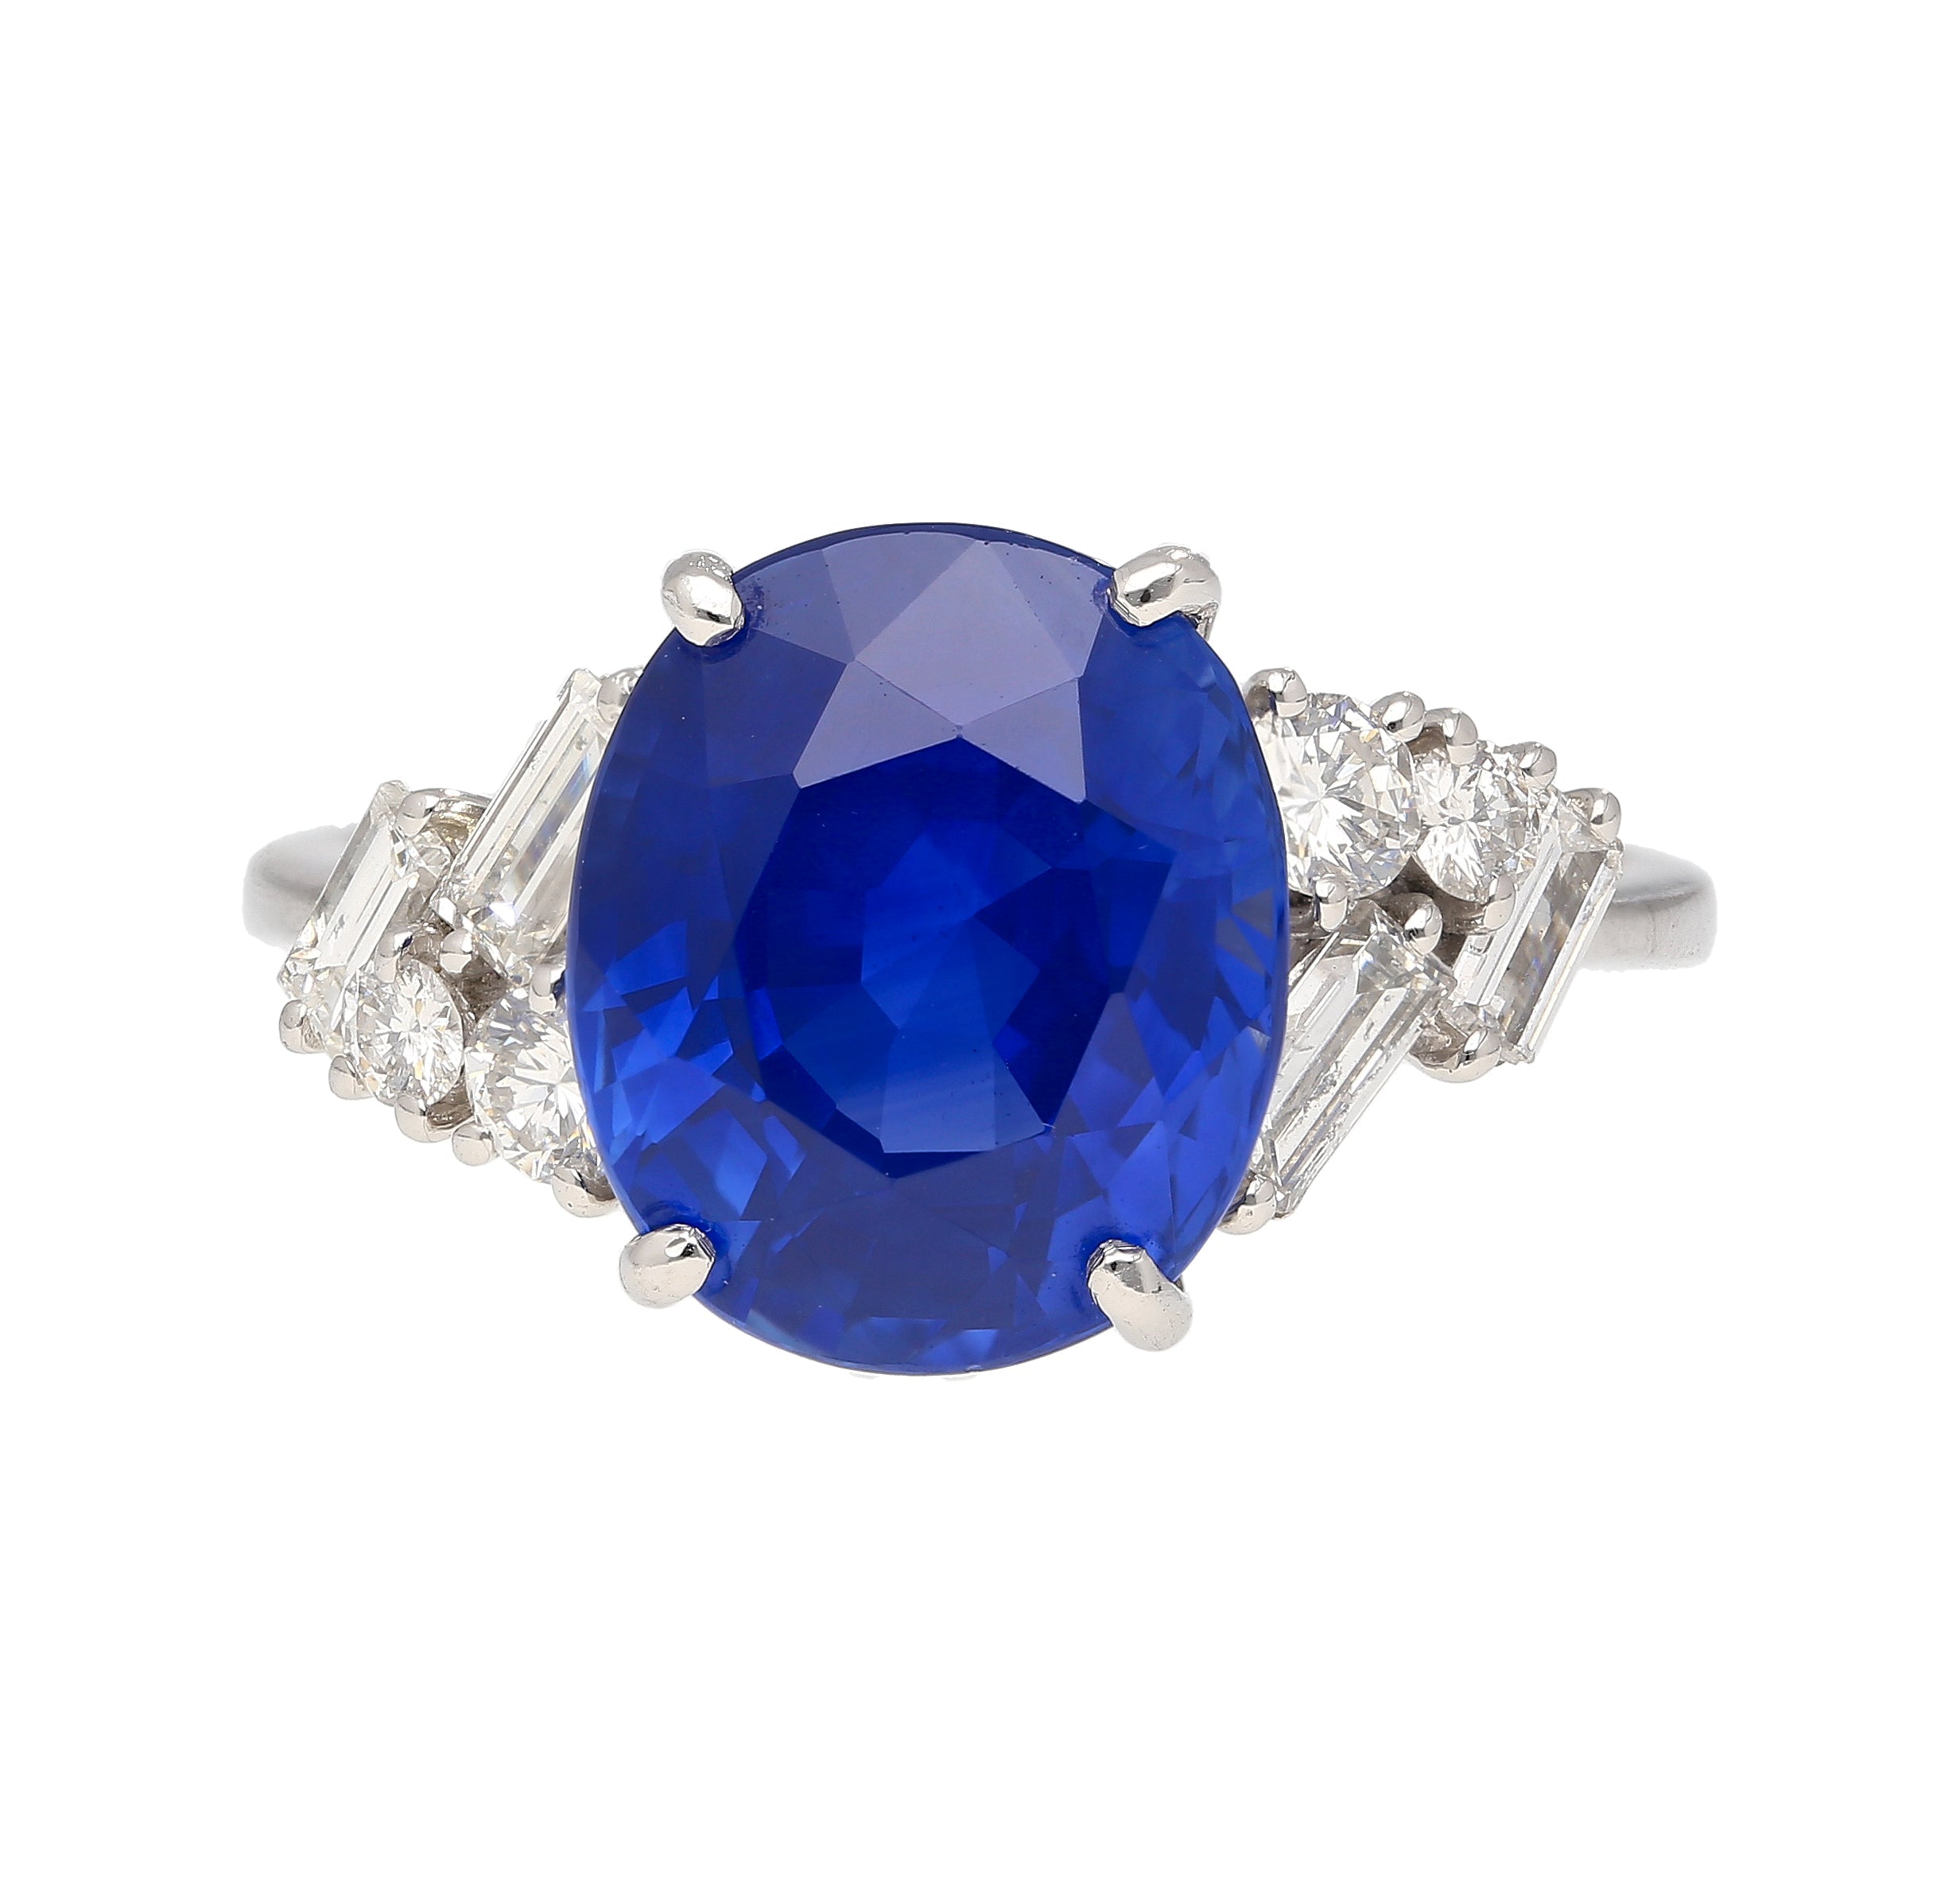 GRS Certified 6.35 Carat Oval Cut Royal Blue Sapphire with Diamonds in Platinum Ring-Rings-ASSAY